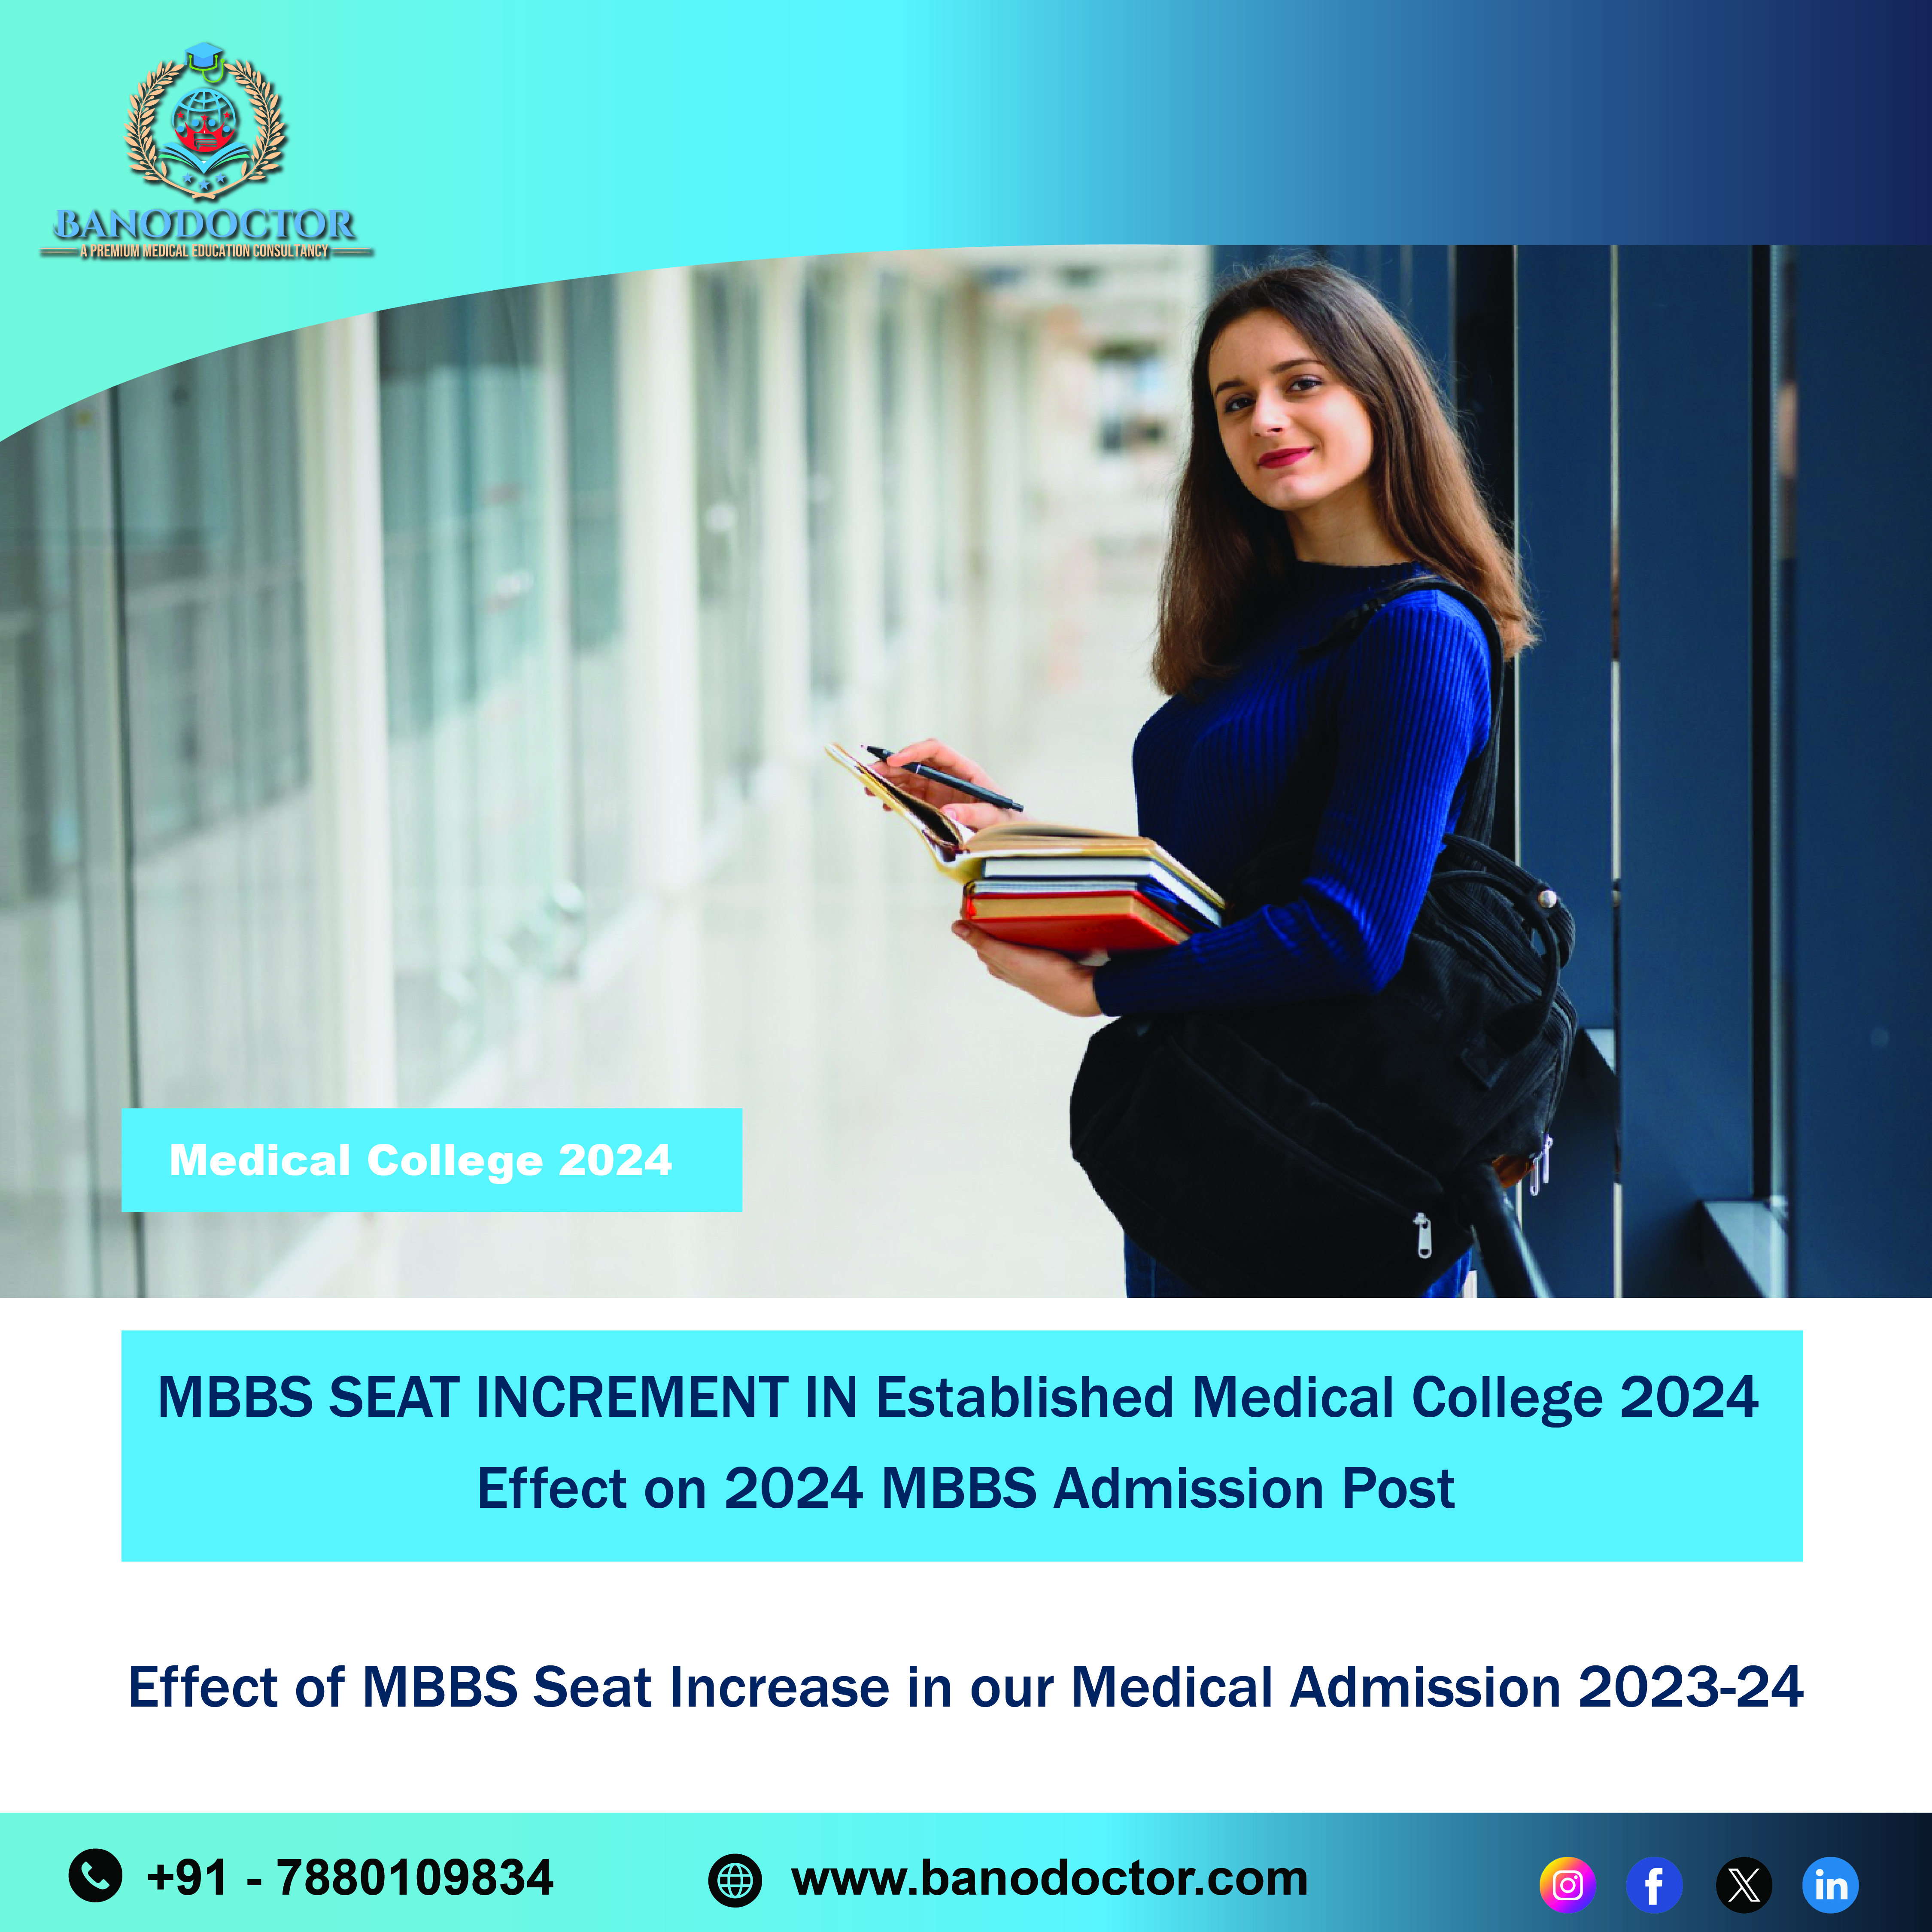 MBBS SEAT INCREMENT IN Established Medical College 2024: effect on 2024 mbbs admission